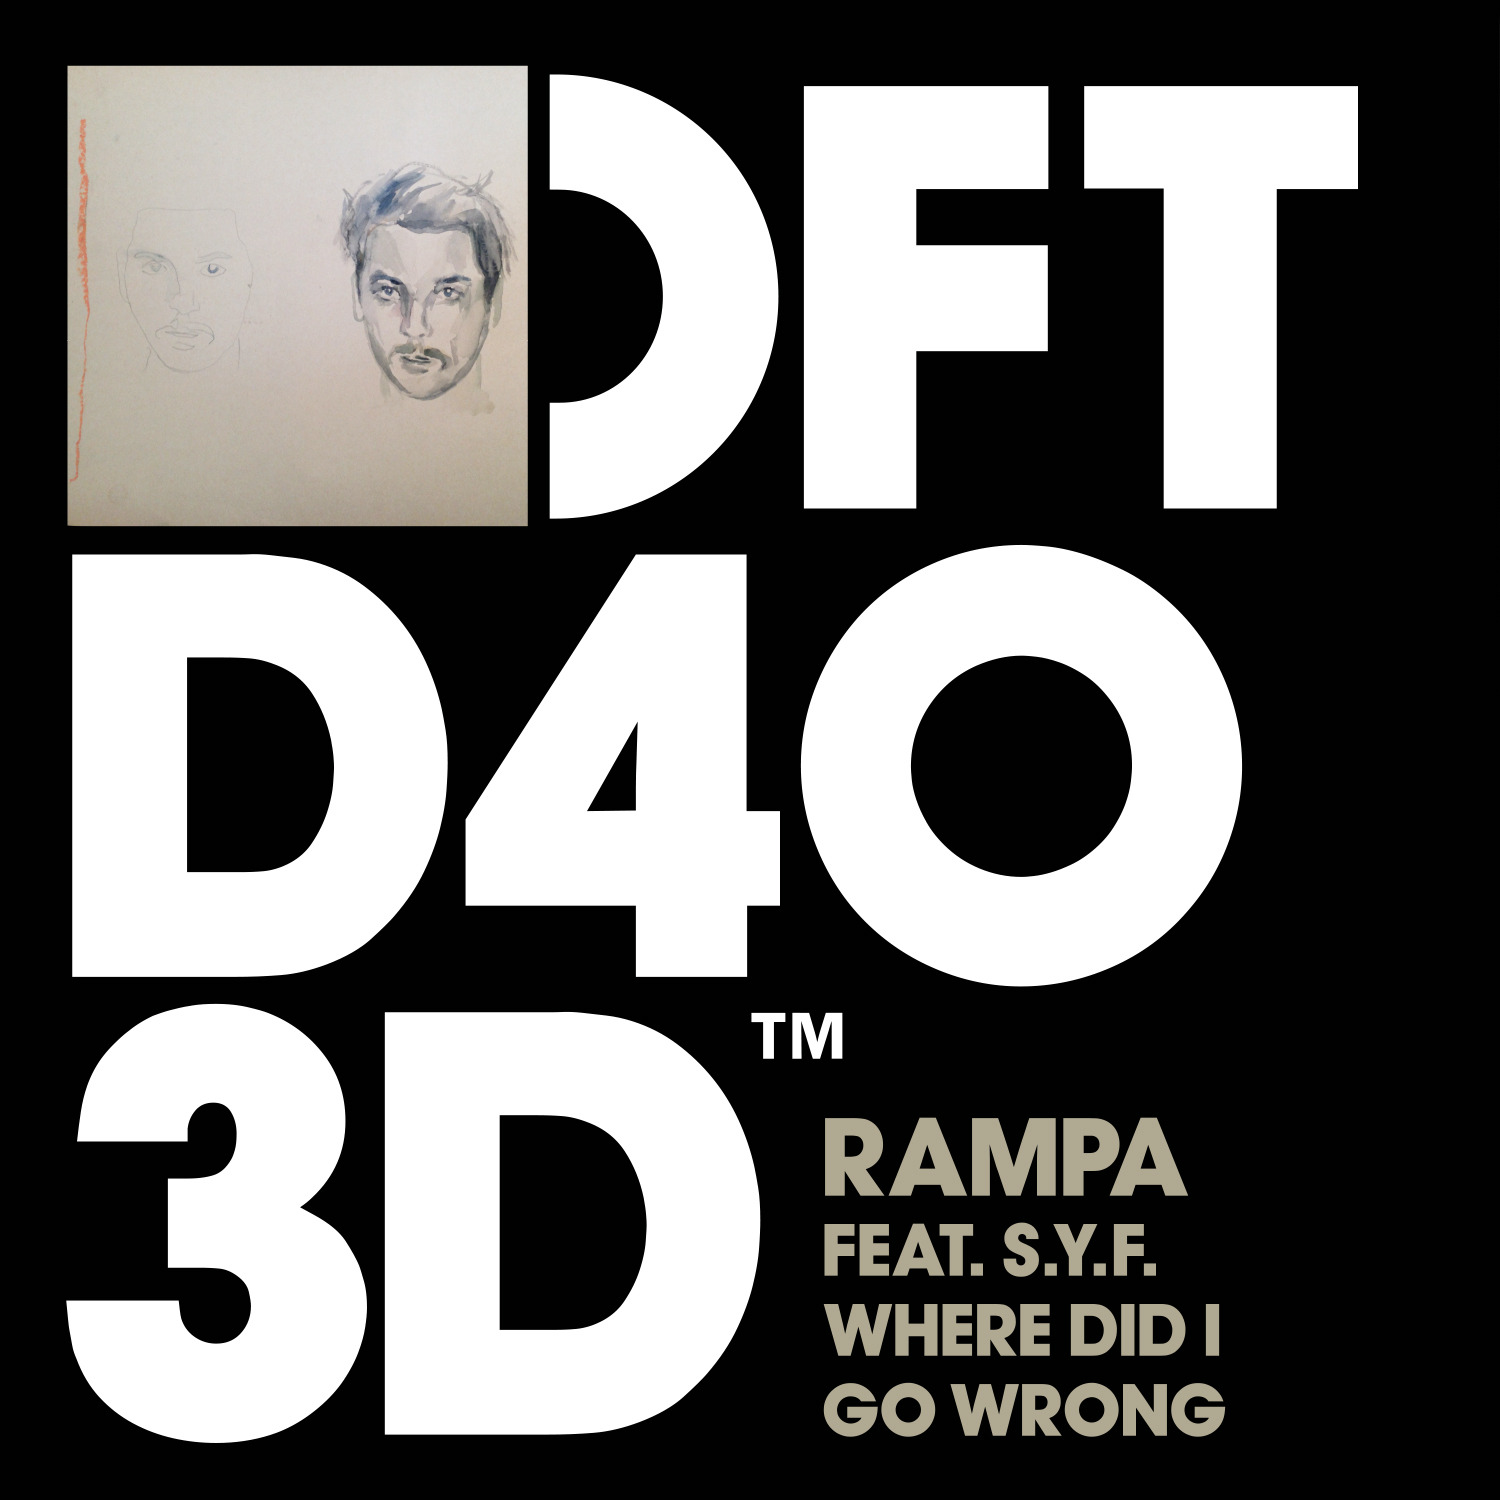 Rampa featuring S.Y.F. - Where Did I Go Wrong